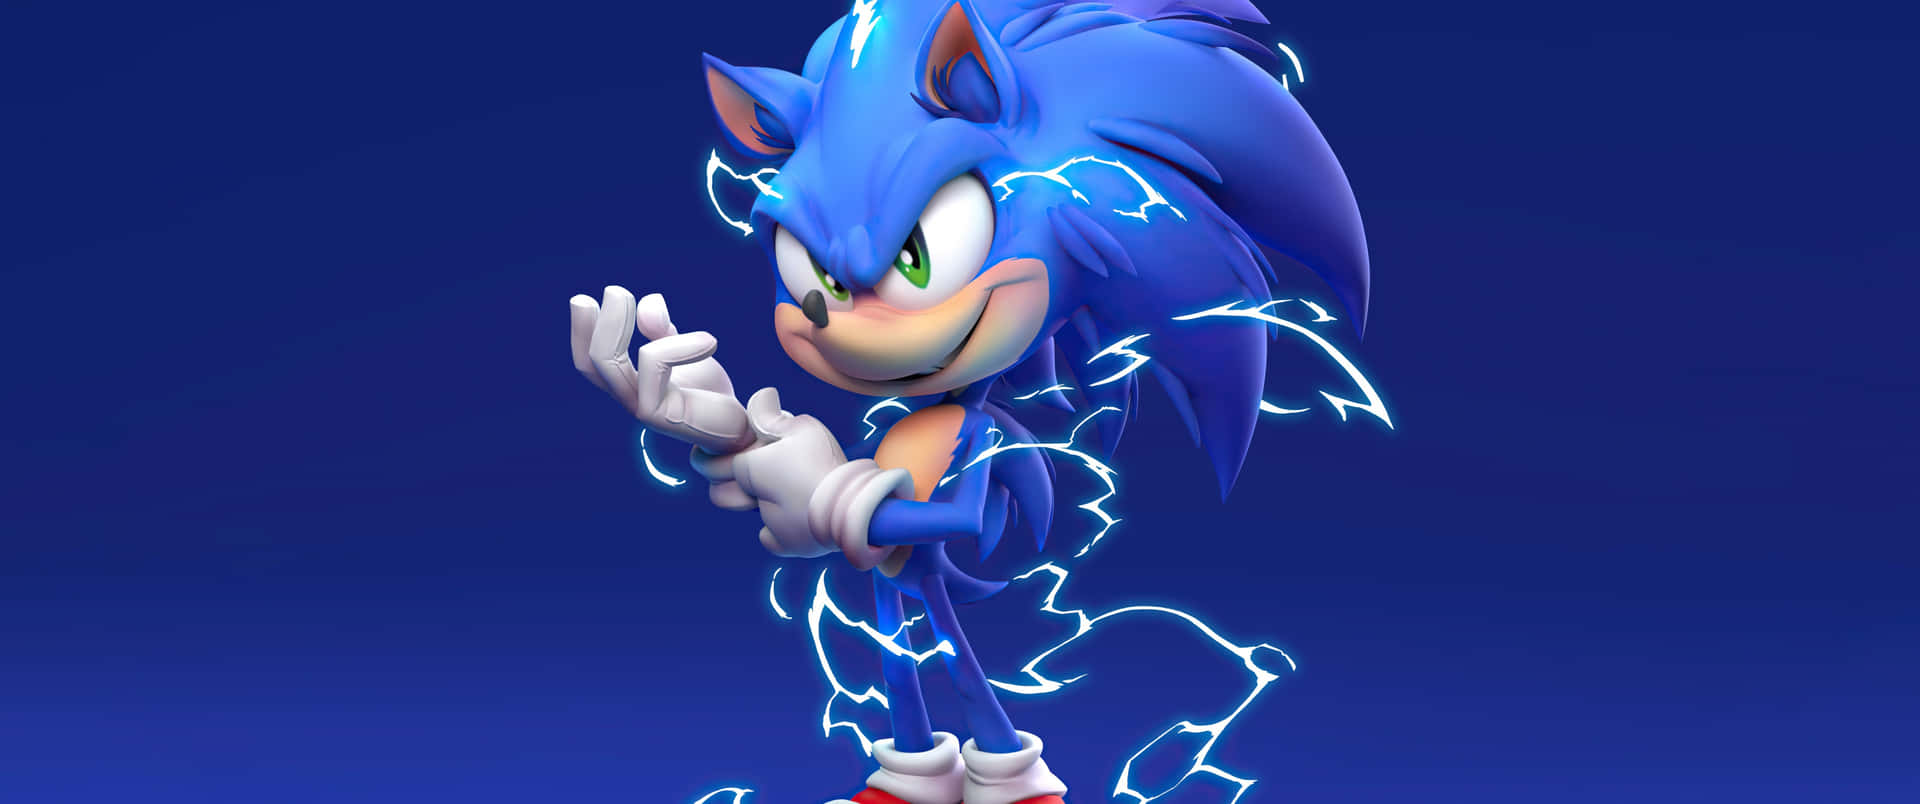 Sonic The Hedgehog at top speed.